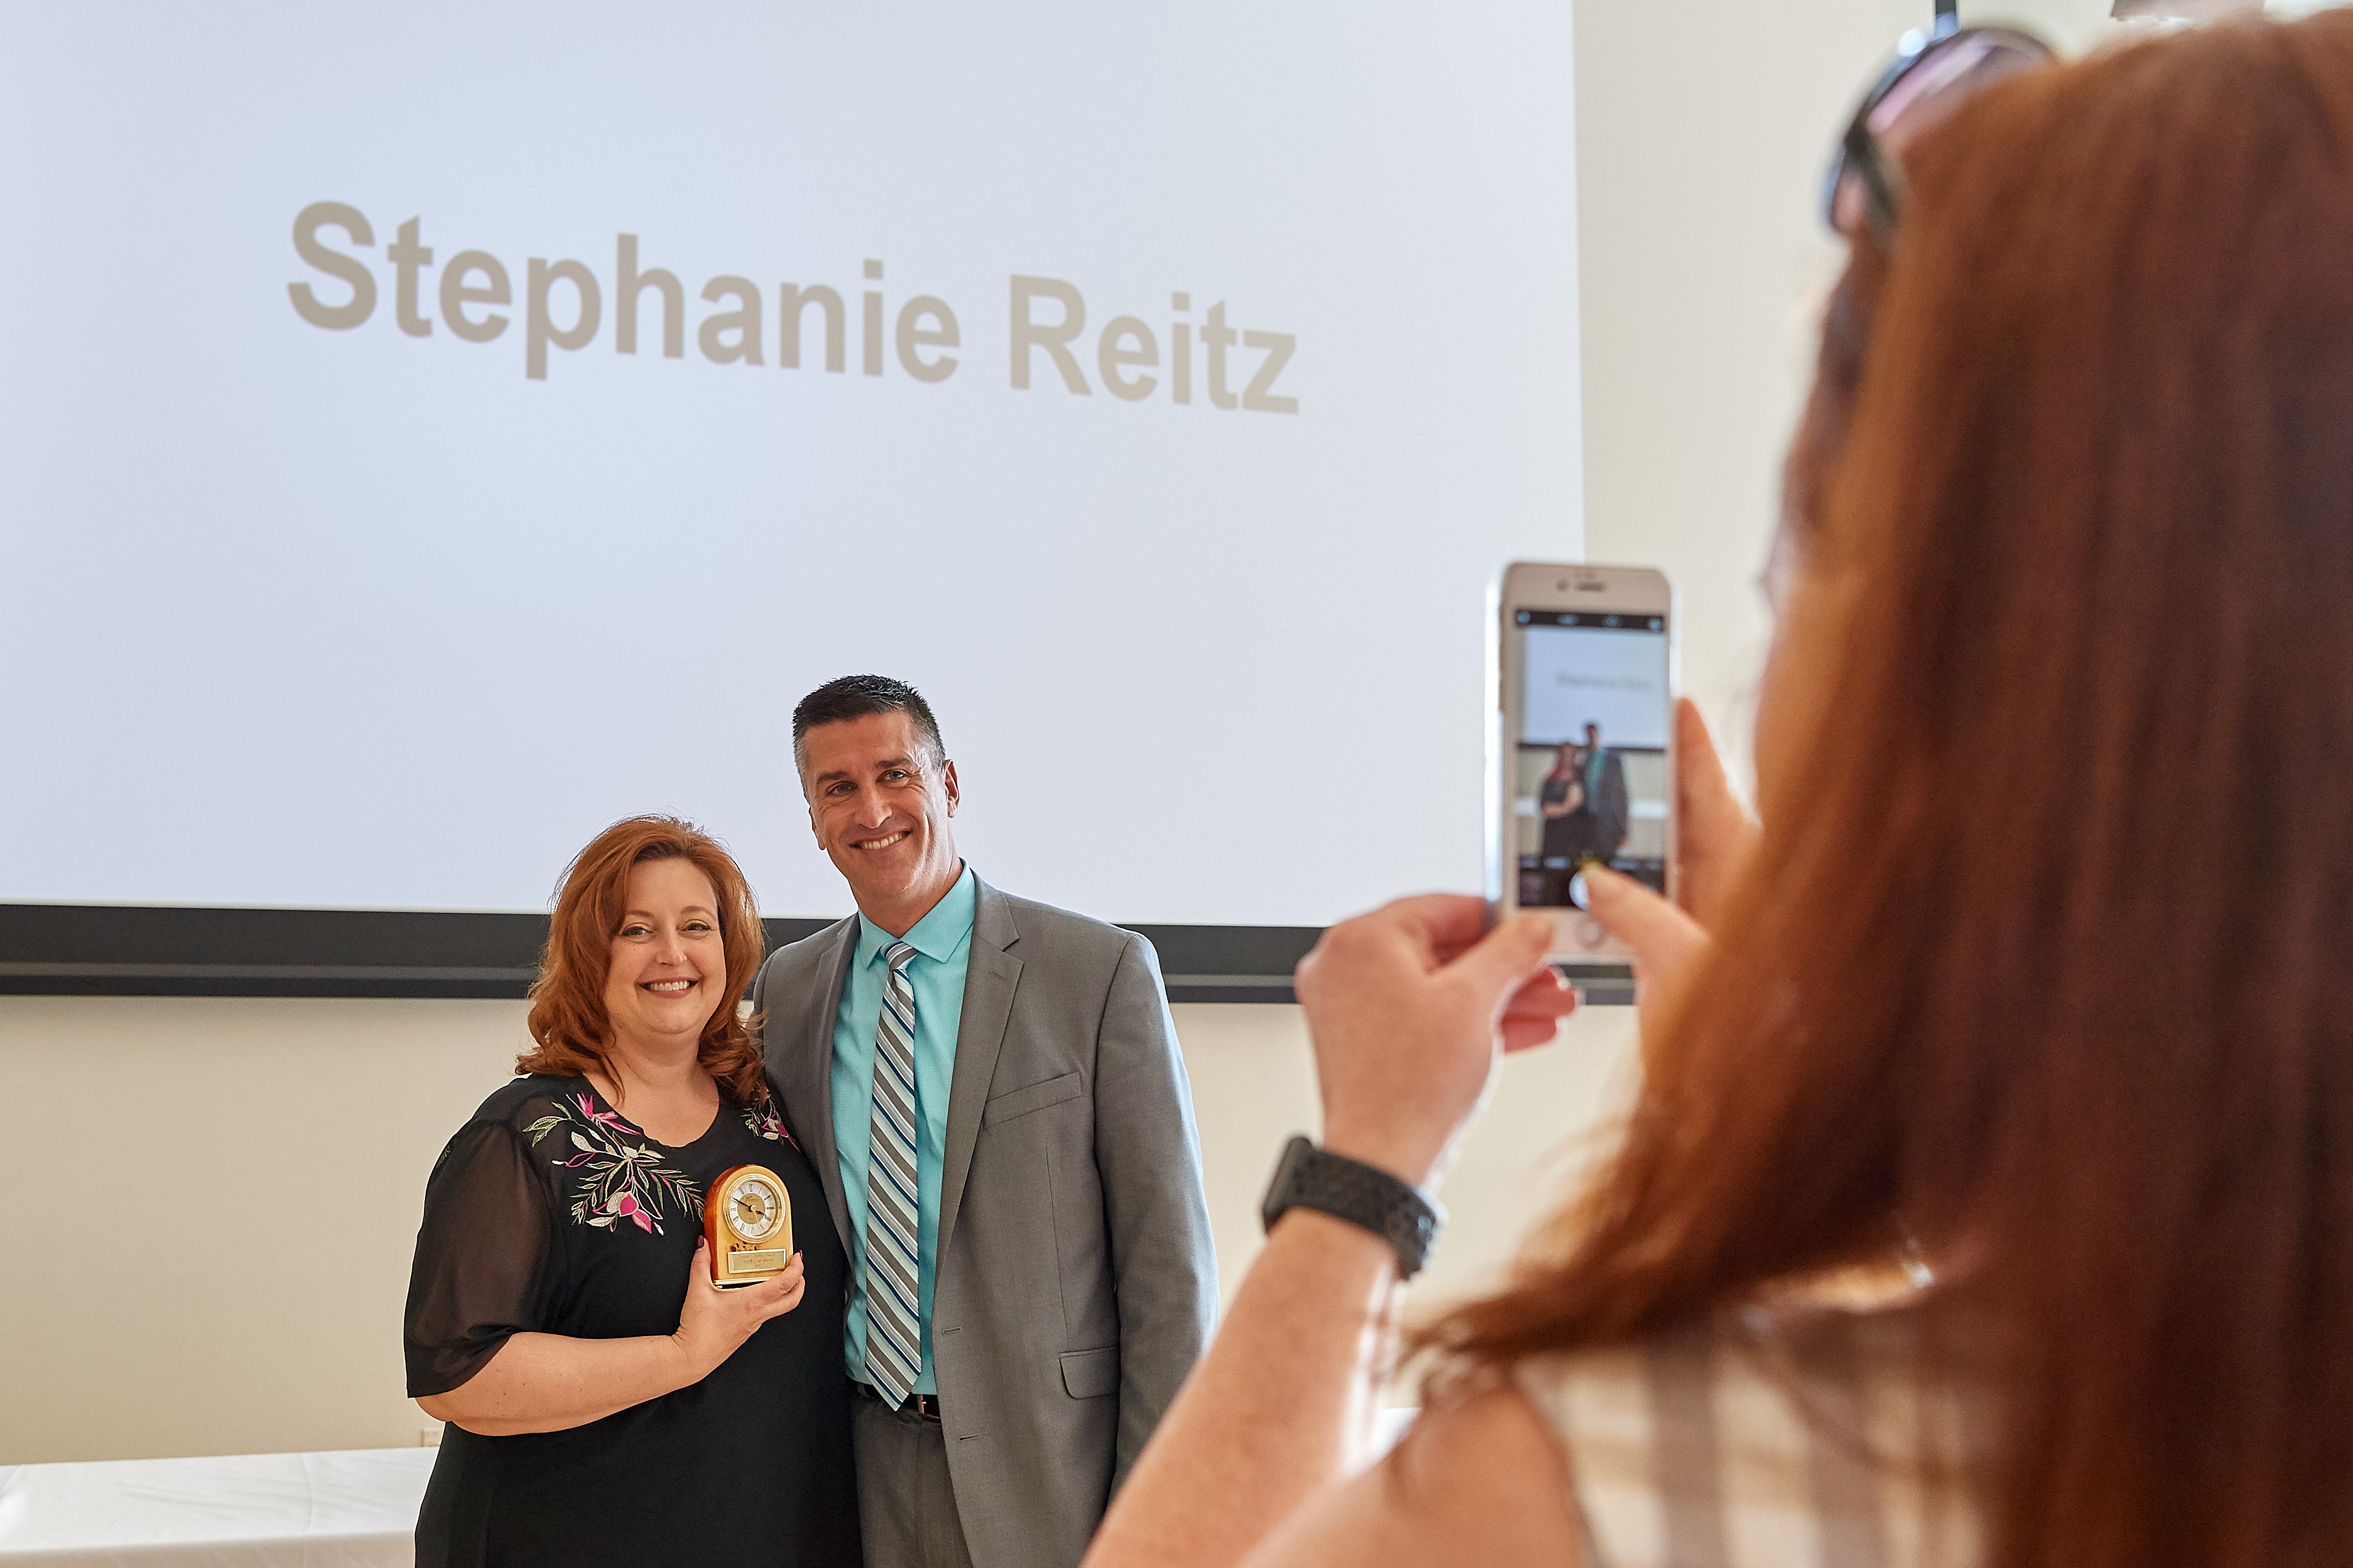 University spokesperson Stephanie Reitz, shown here with Vice President Tysen Kendig, was among those recognized for their contributions to student life at the 2018 Division of Student Affairs Awards Program in the Student Union Ballroom on May 2. (Peter Morenus/UConn Photo)